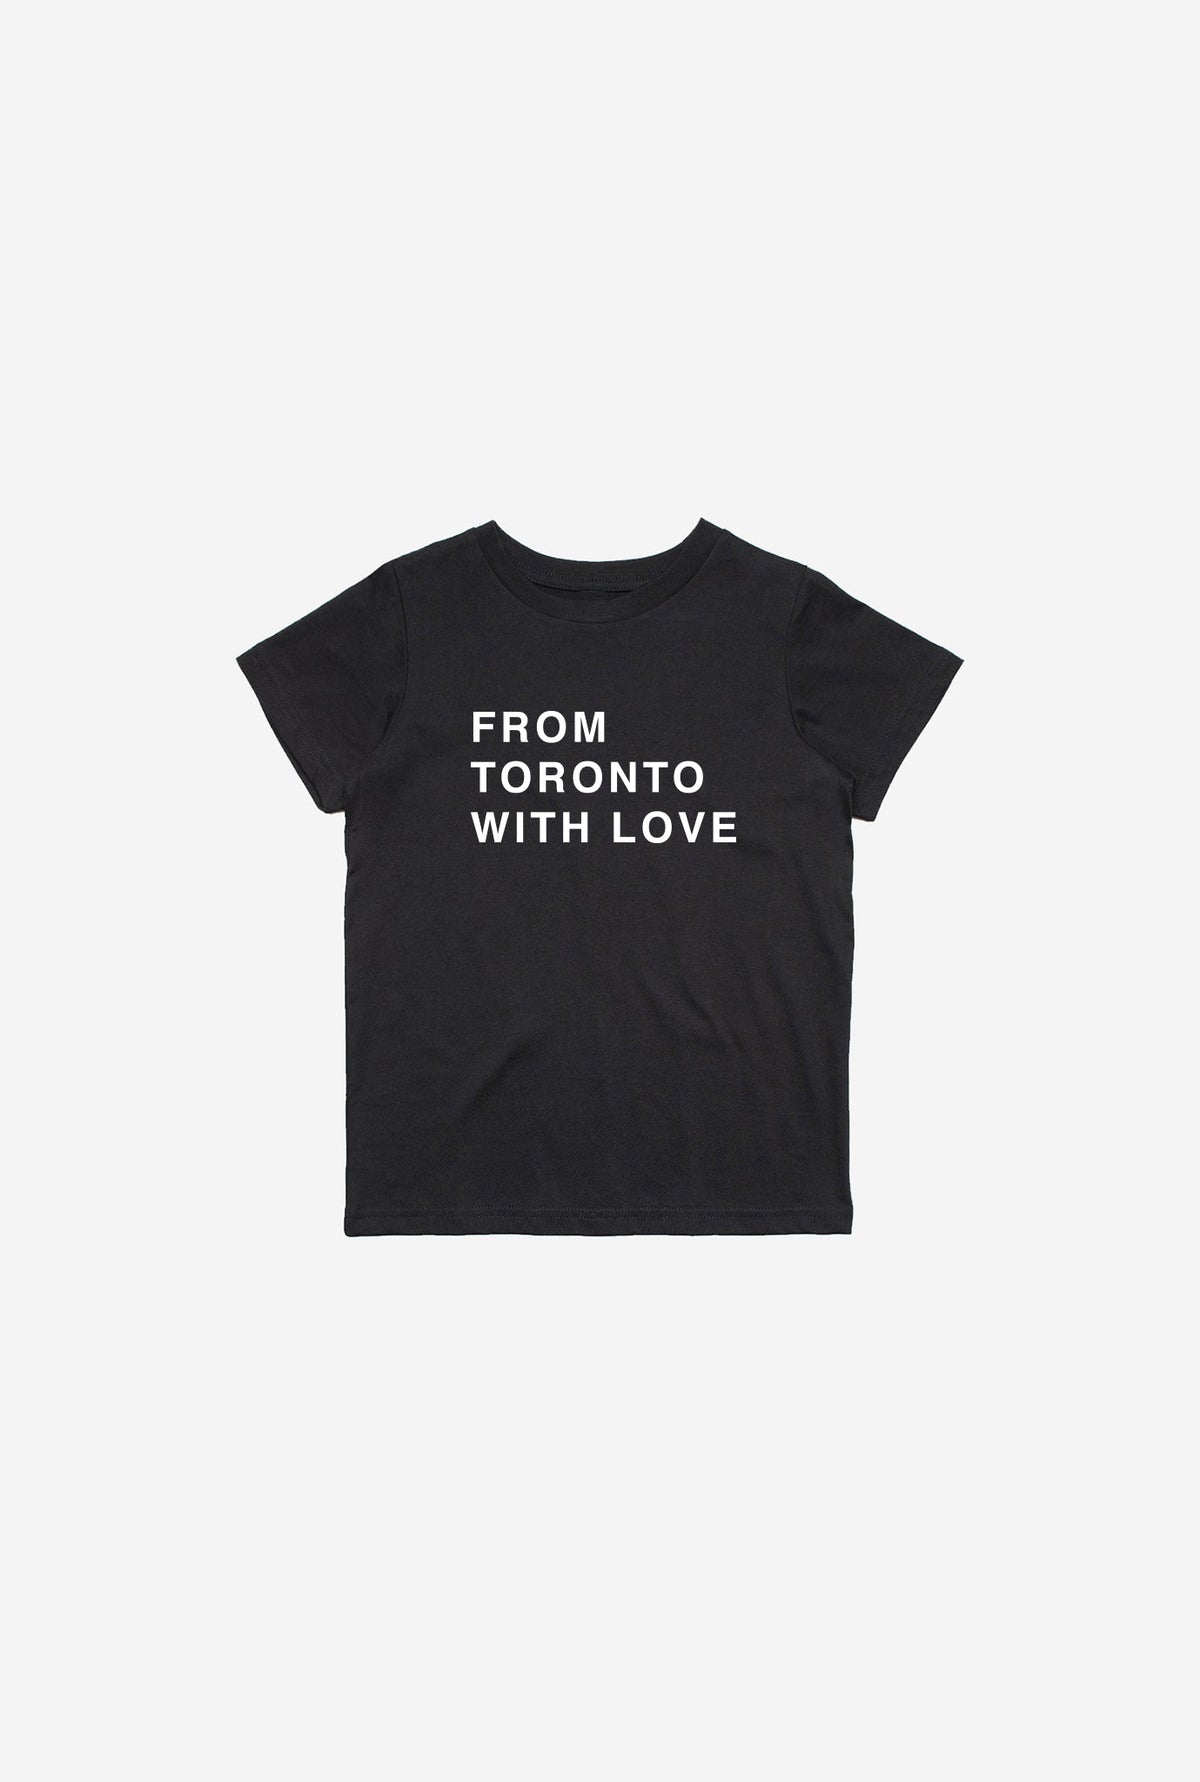 From Toronto with Love Kids T-Shirt - Black